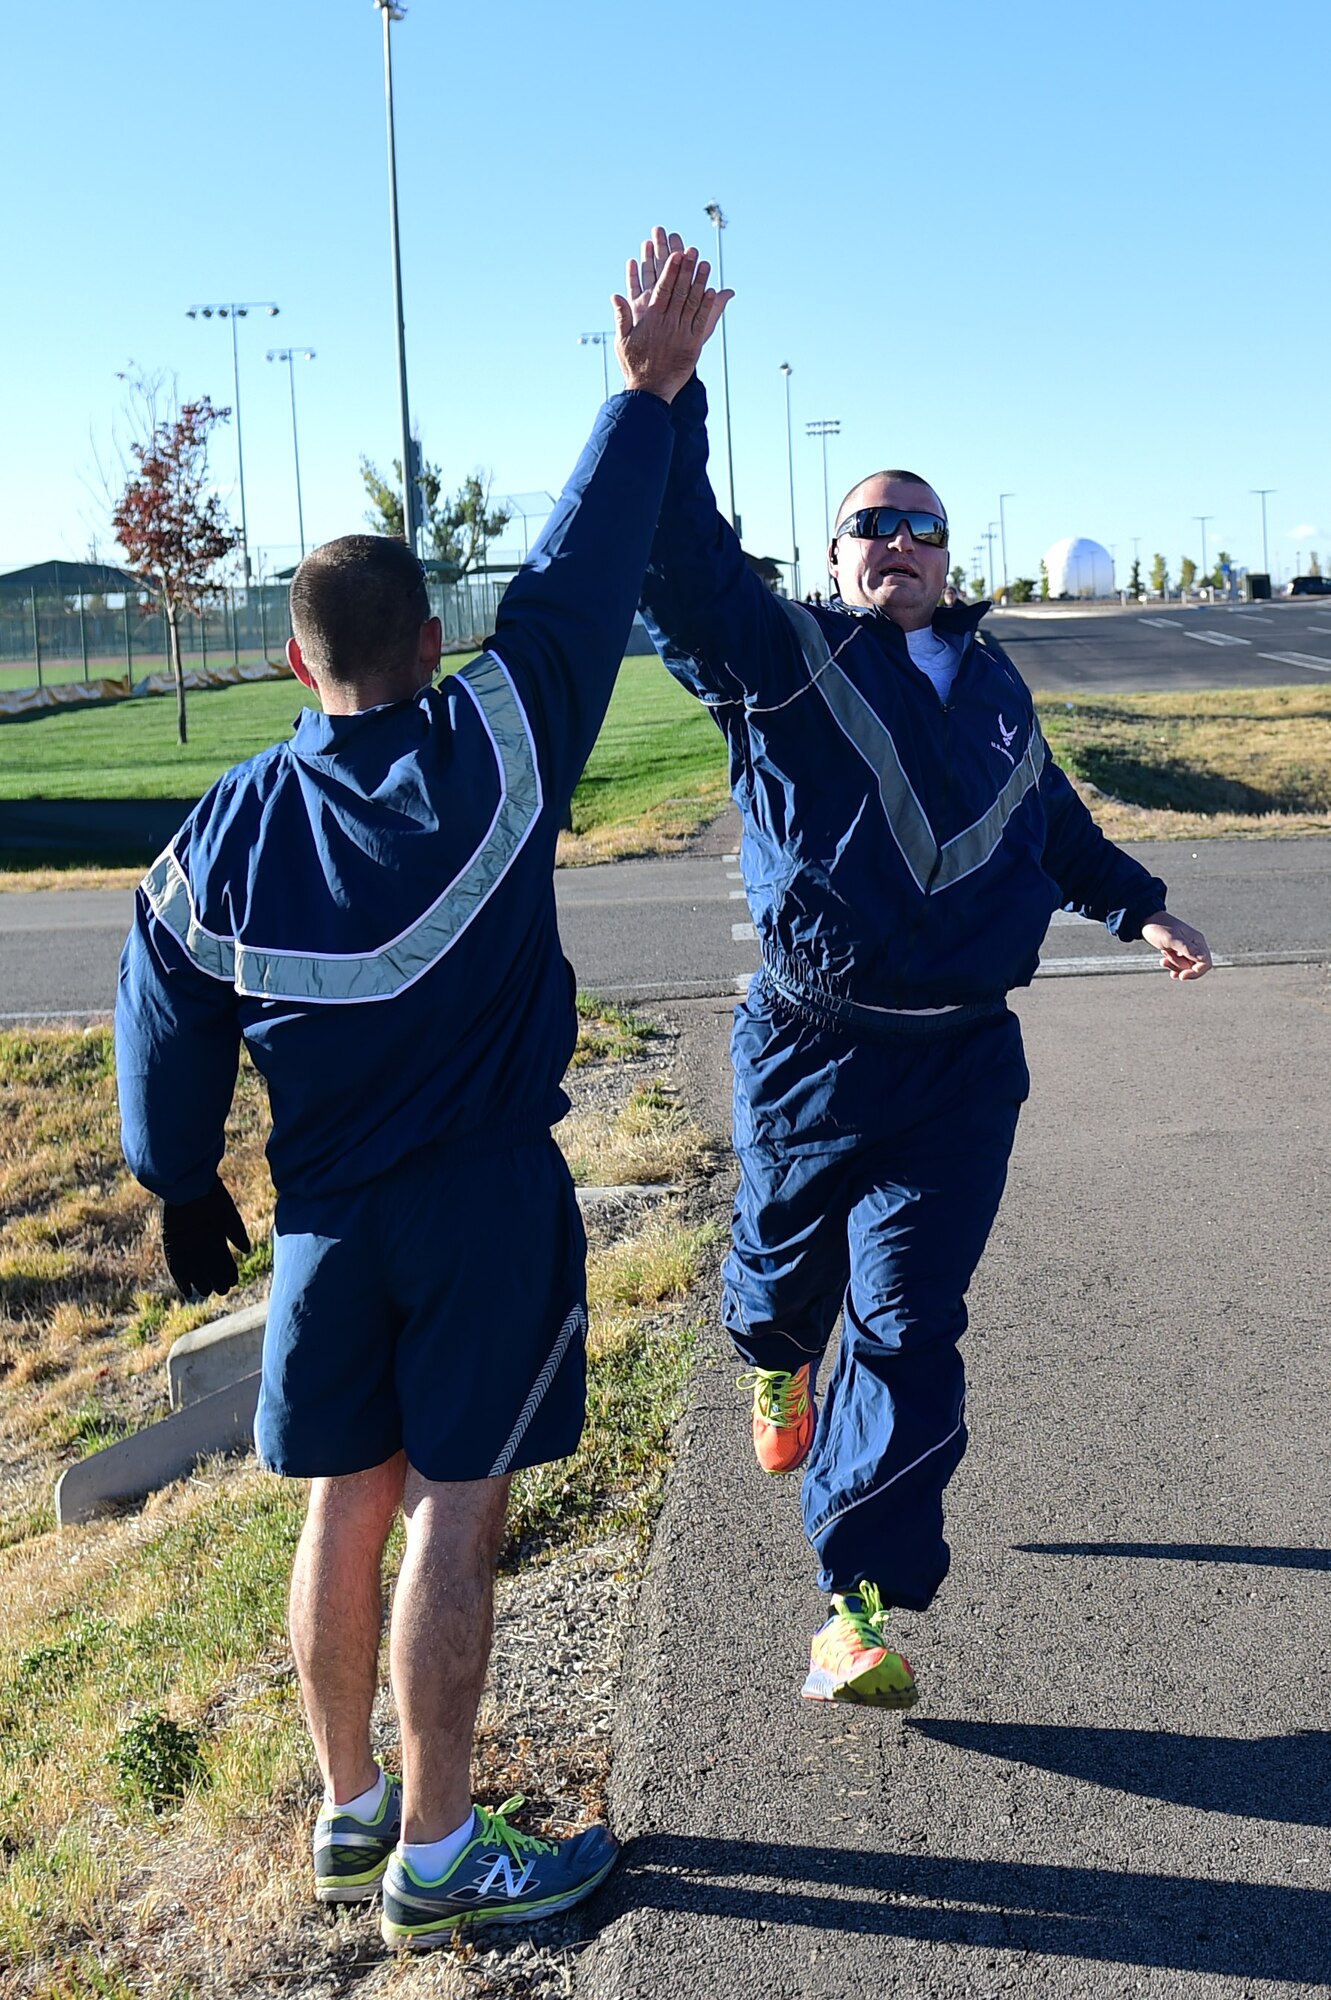 Chief Master Sgt. Mark Fousek, 460th Medical Group superintendent, gives a participant a high five during a Domestic Violence Awareness Month 5K Run/Walk Oct. 5, 2016, at the outdoor track on Buckley Air Force Base, Colo. Participants either ran or walked to bring awareness to those who, according to National Coalition Against Domestic Violence statistics, on an average day, make the more than 20,000 phone calls that are placed to domestic violence hotlines nationwide. (U.S. Air Force photo by Airman 1st Class Gabrielle Spradling/Released)